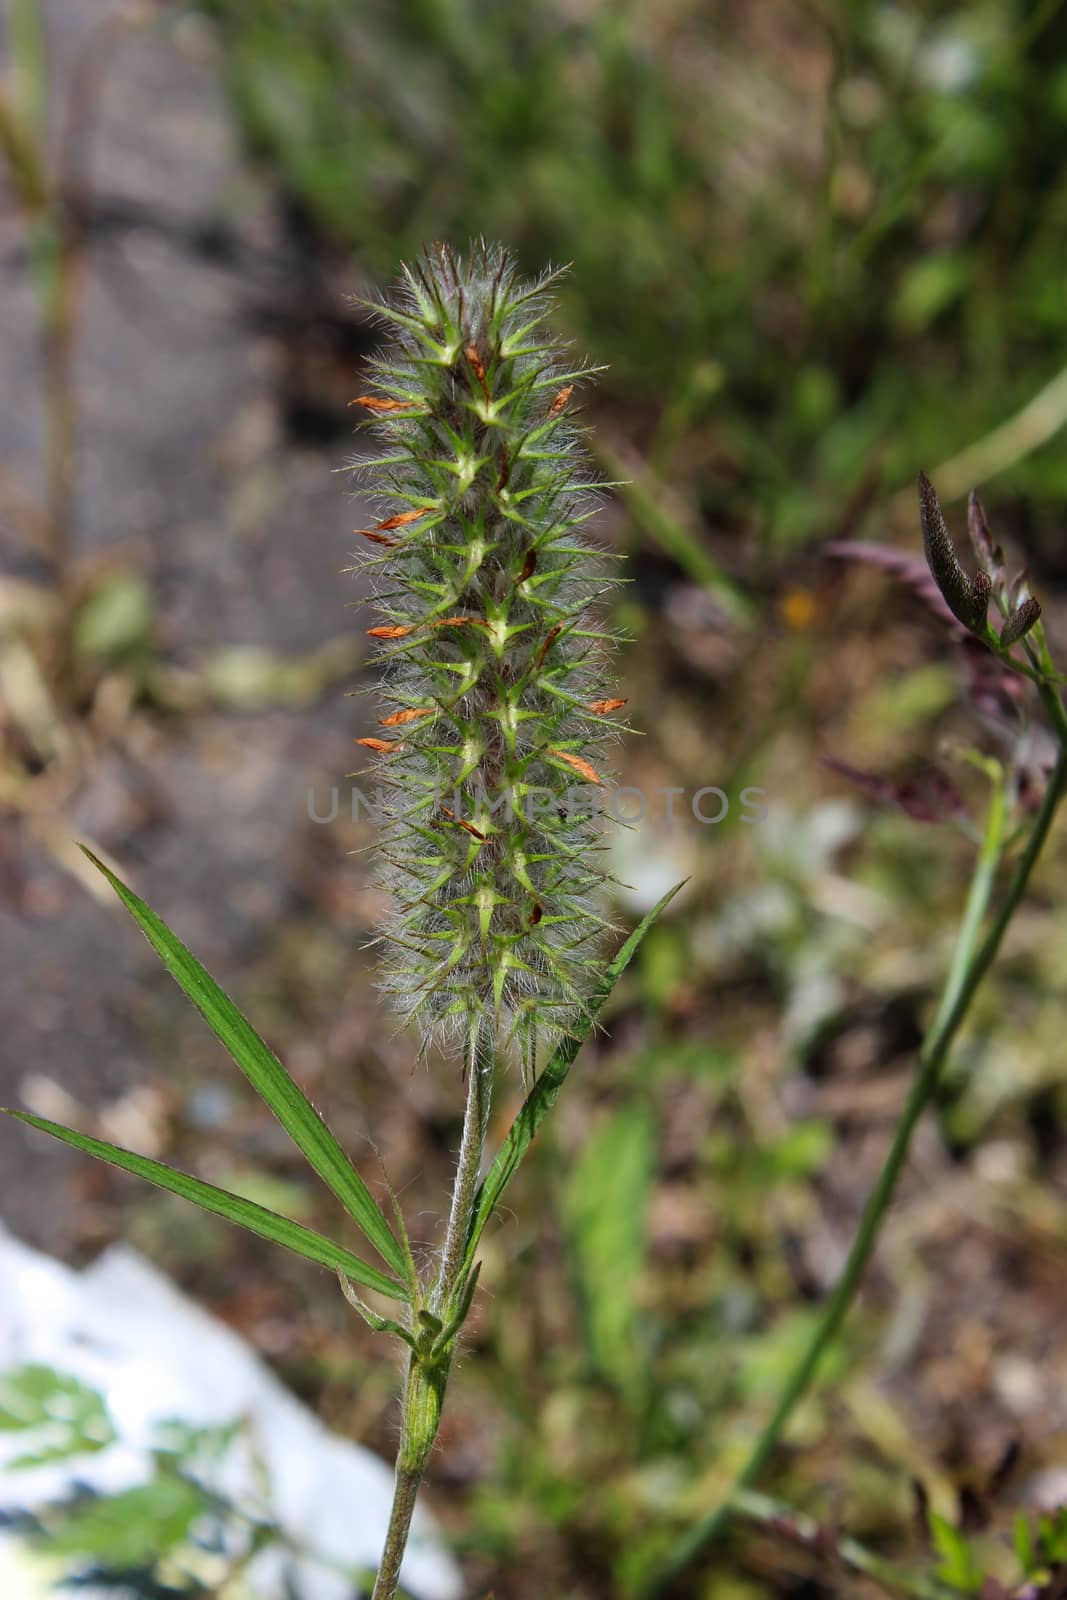 Some kind of grass with thorns on the seed head. Beja, Portugal.